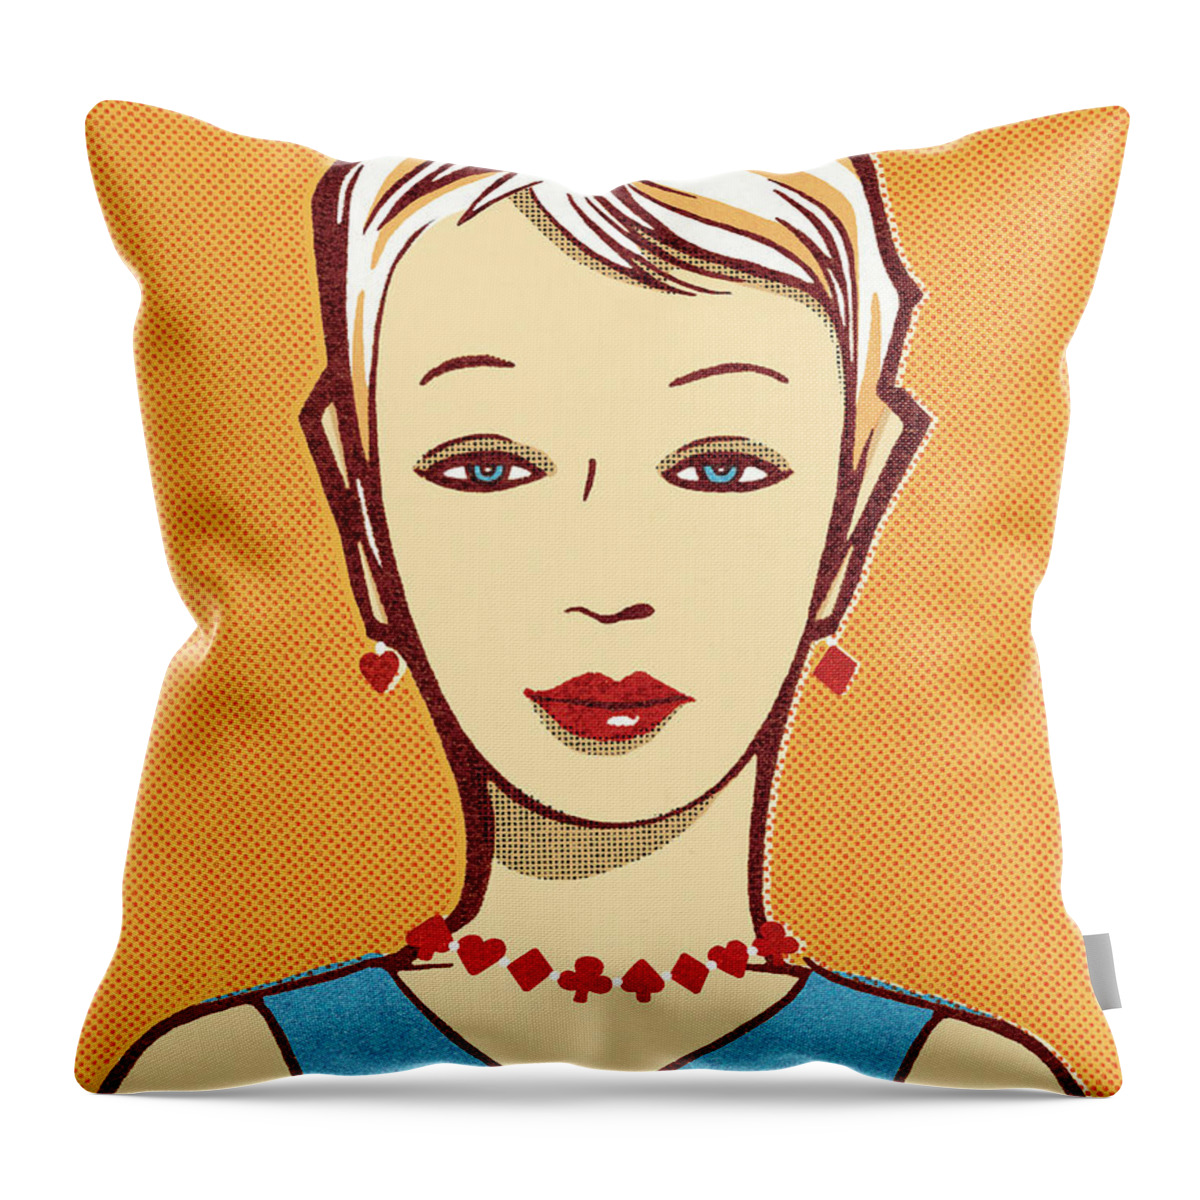 Adult Throw Pillow featuring the drawing Short-haired woman by CSA Images